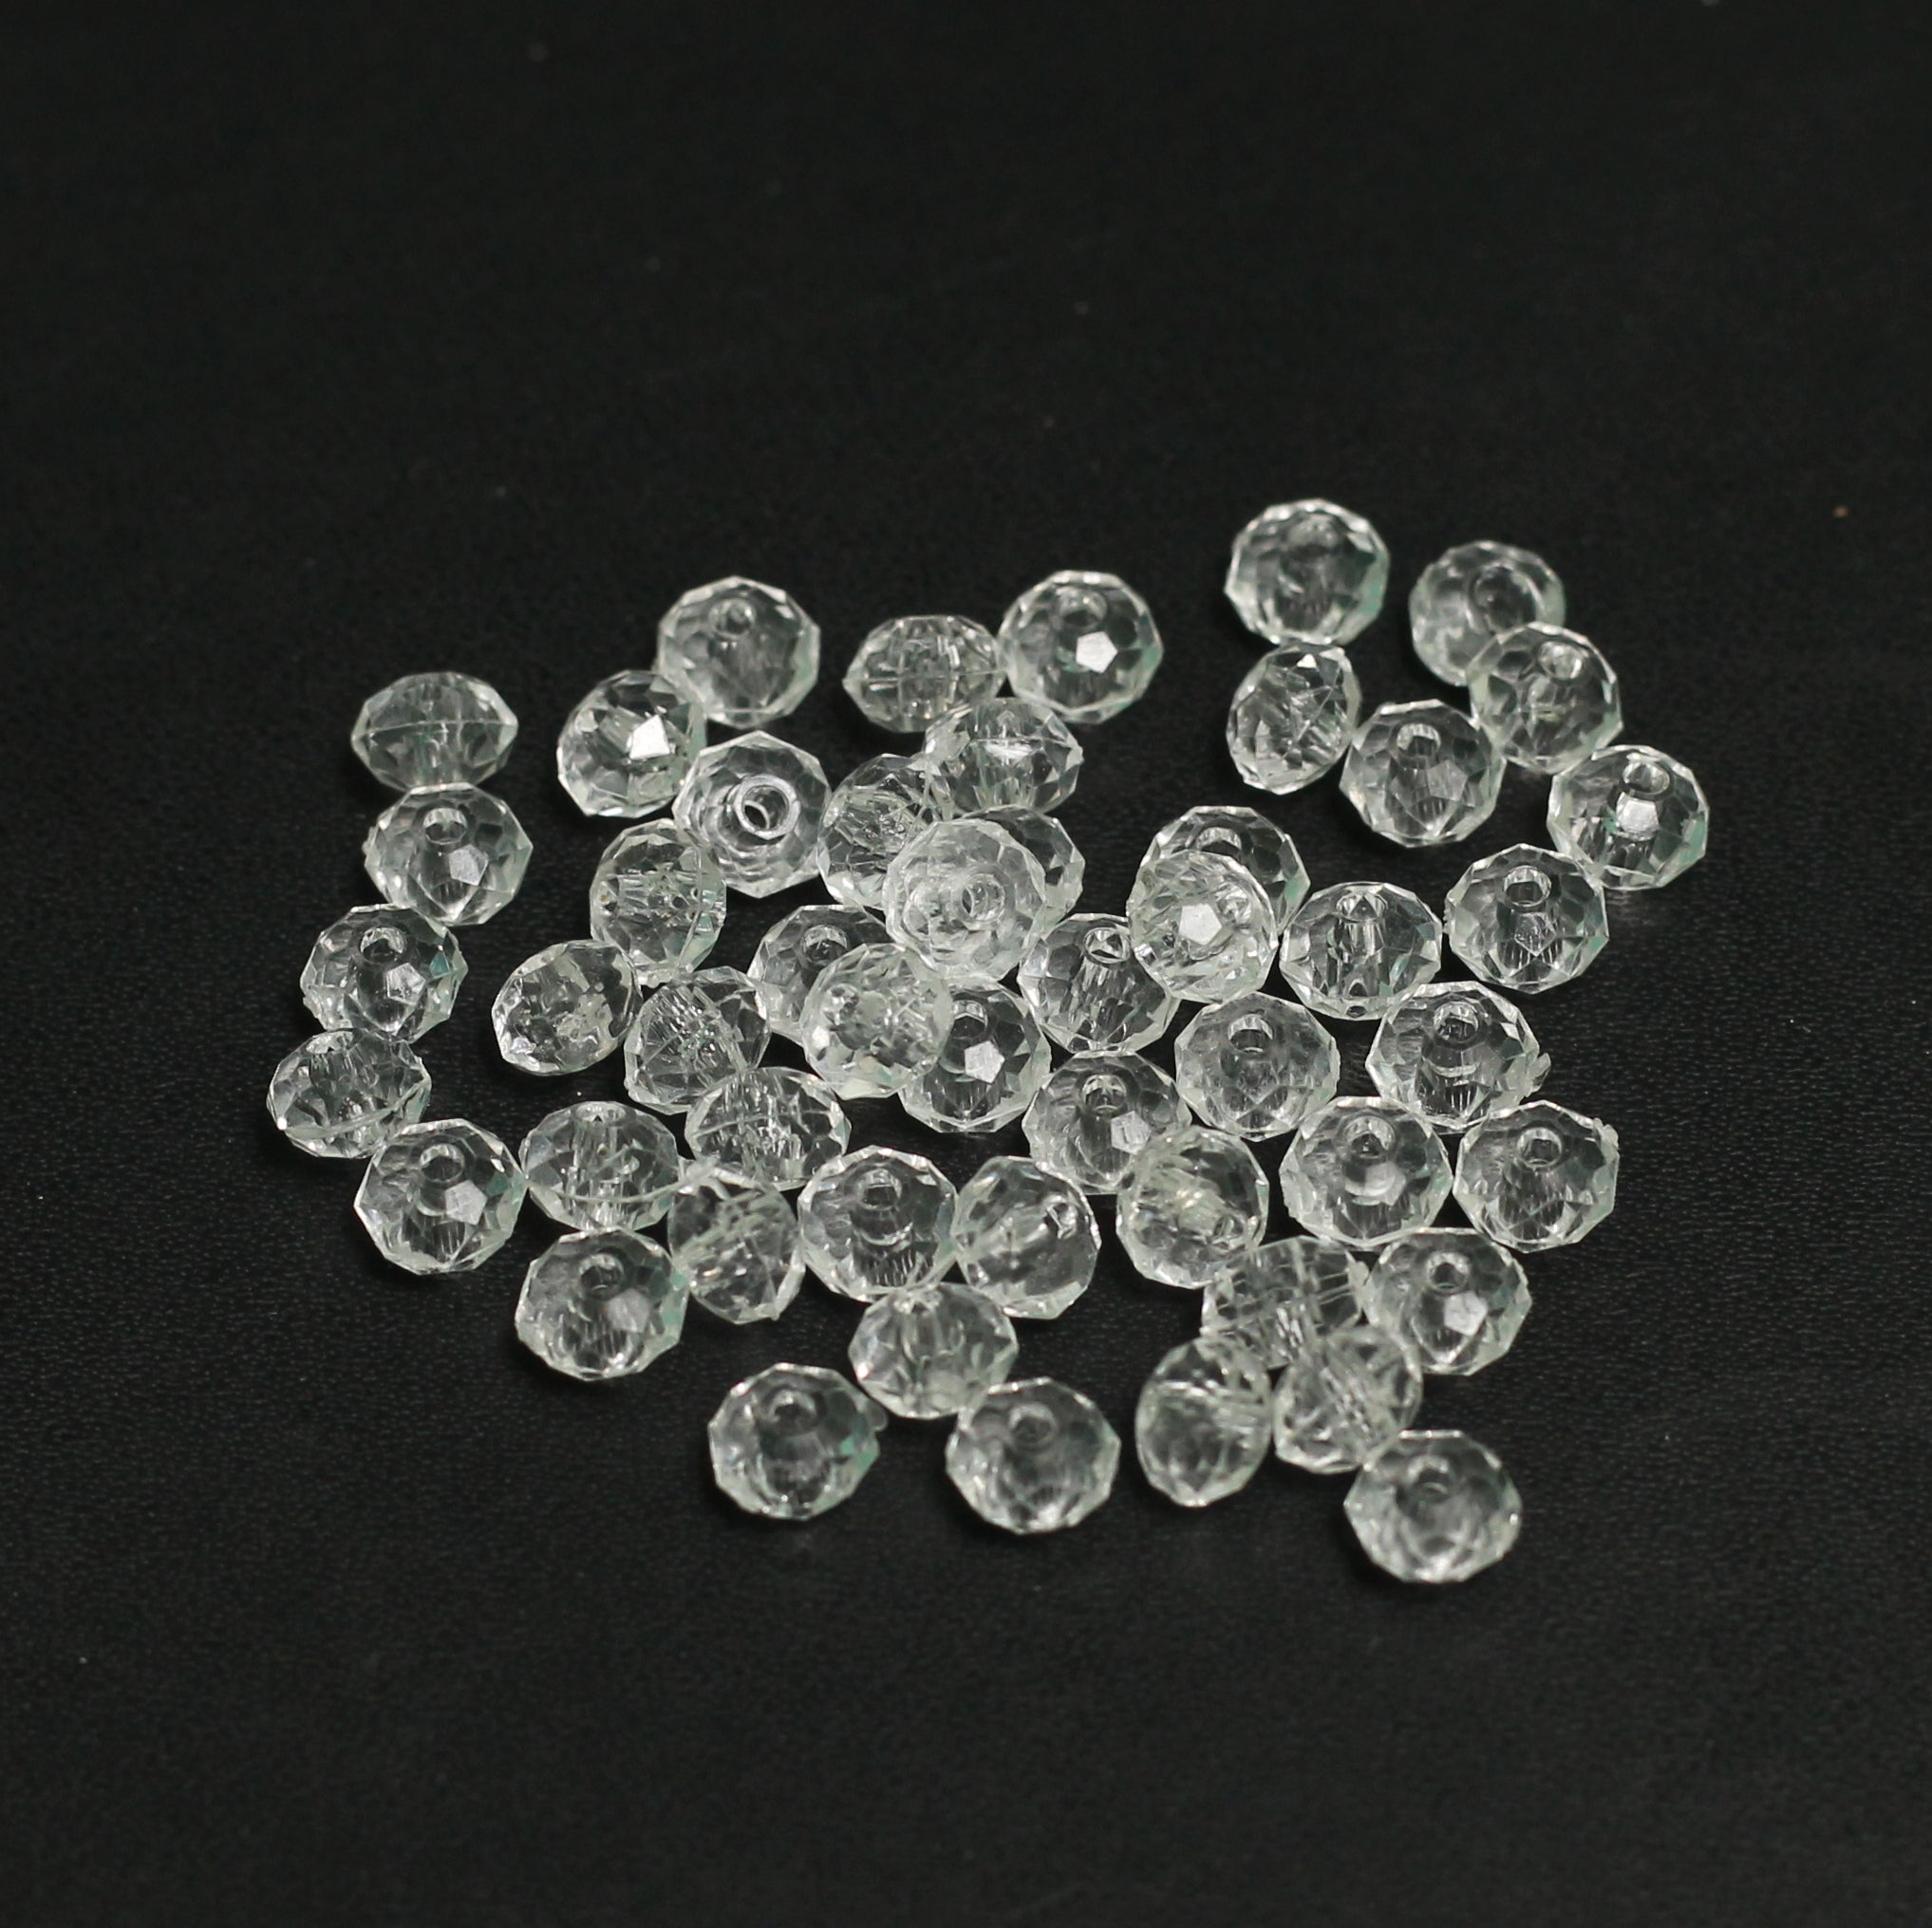 200 Pcs 6x4mm Clear Faceted Acrylic Round Beads